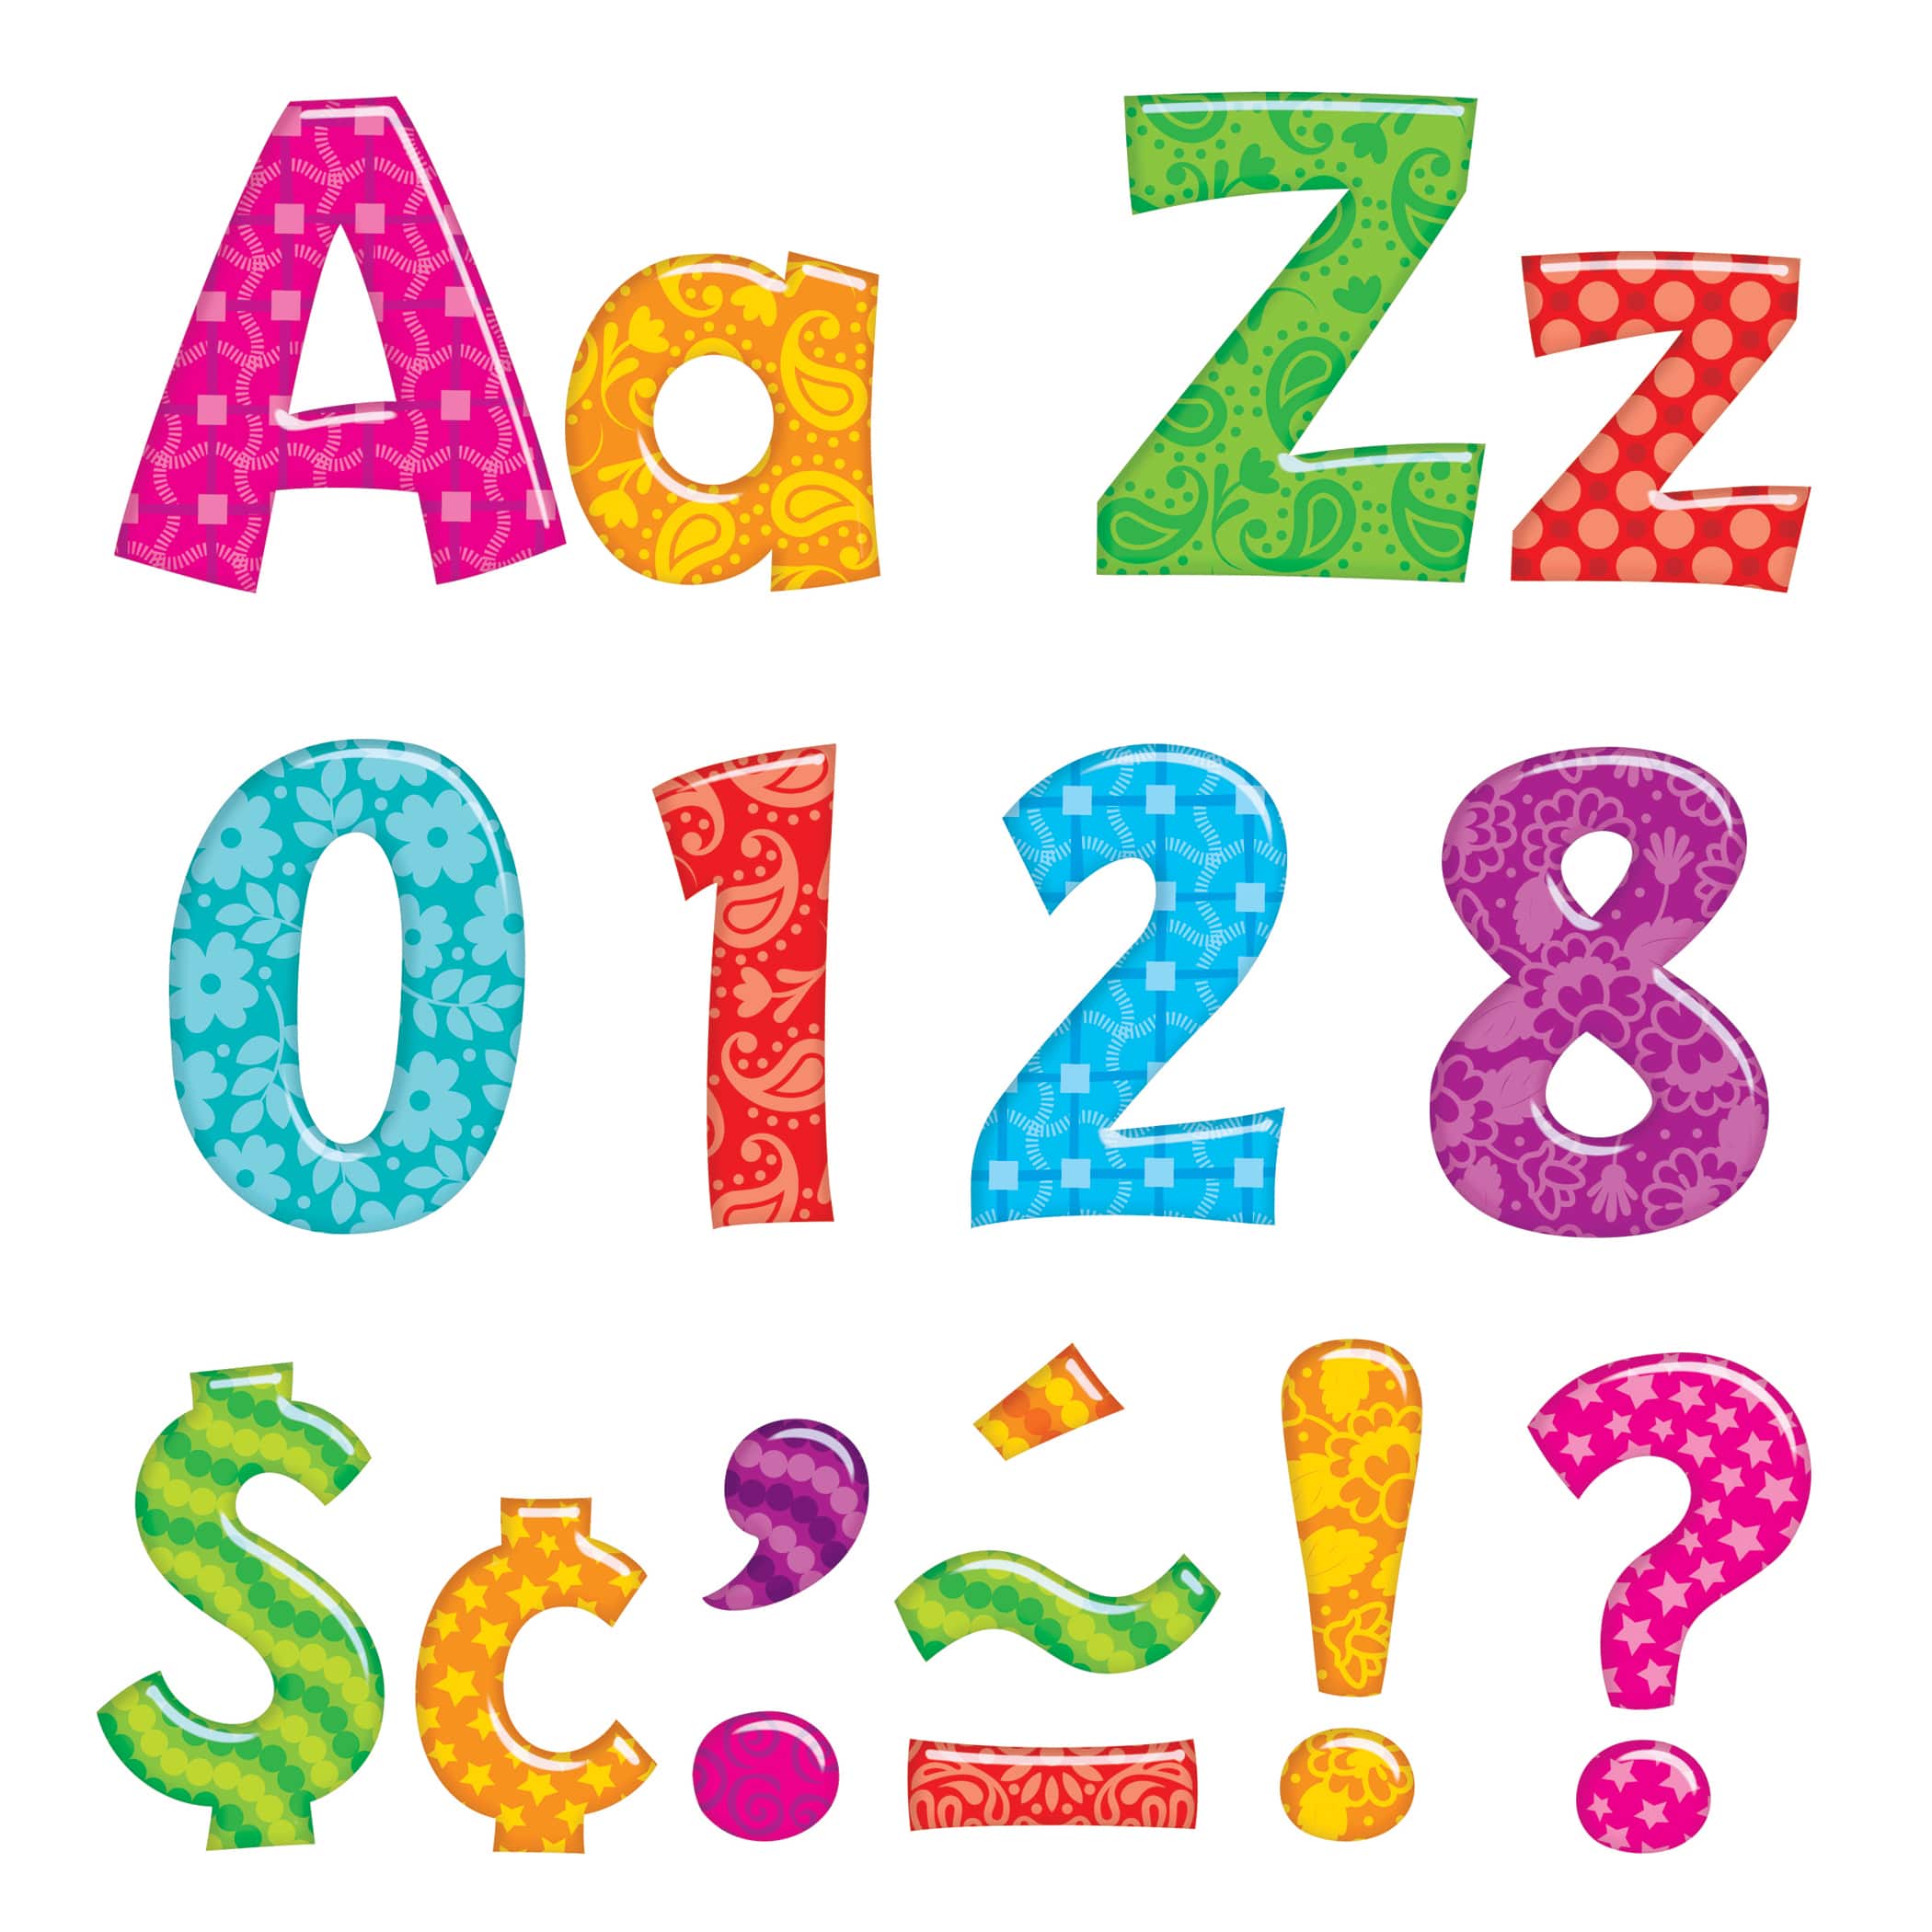 Trend Enterprises Colorful Patterns 4&#x22; Playful Uppercase/Lowercase Combo Pack Ready Letters&#xAE;